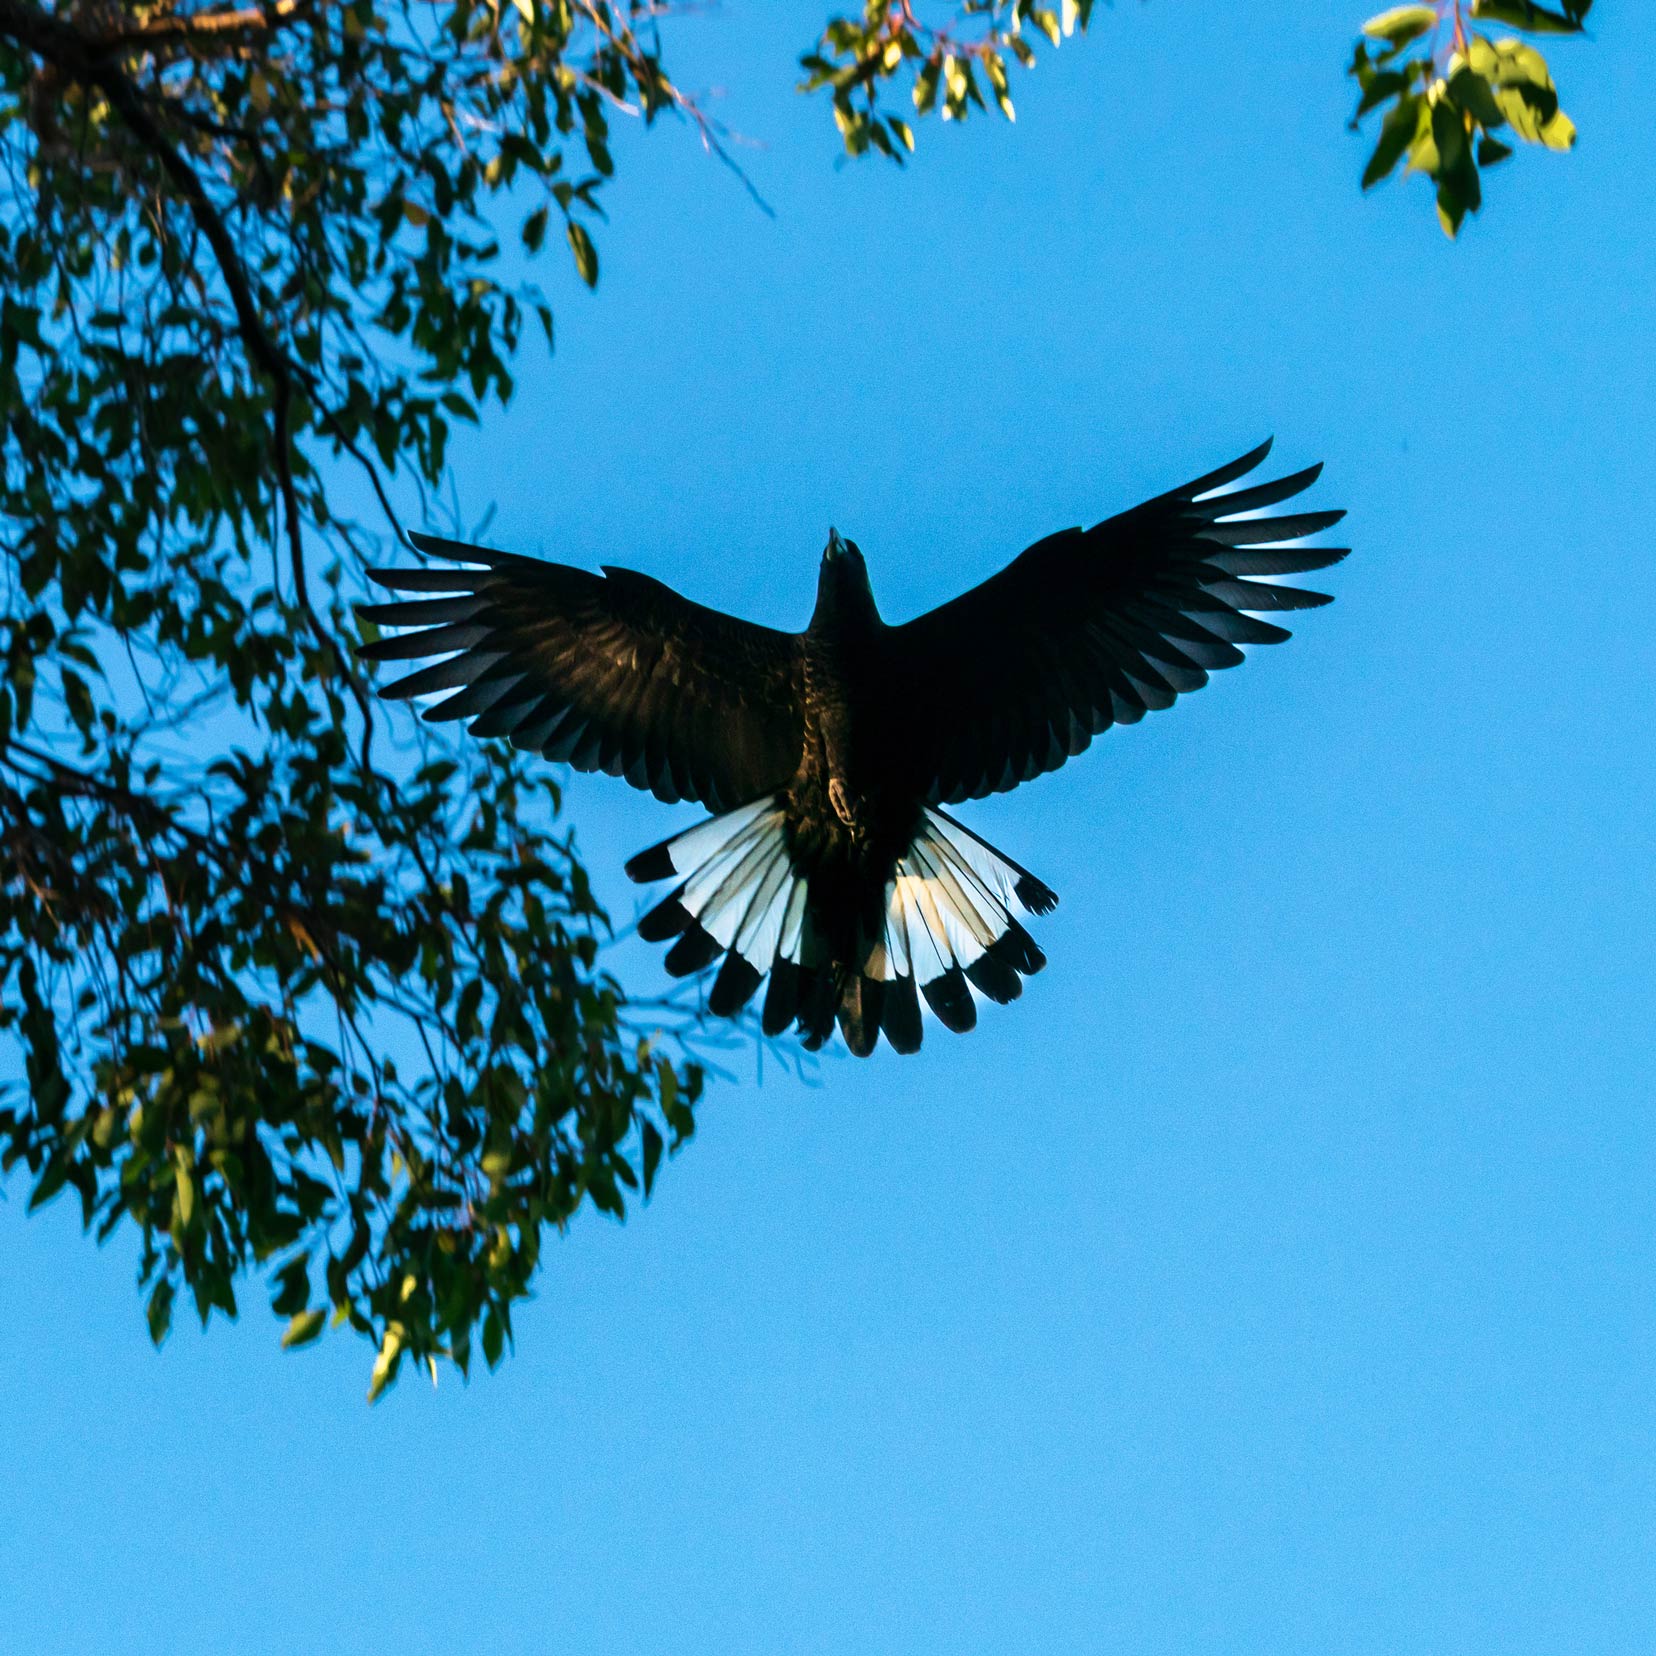 White tailed cockatoo flying above with blue sky and tree nearby